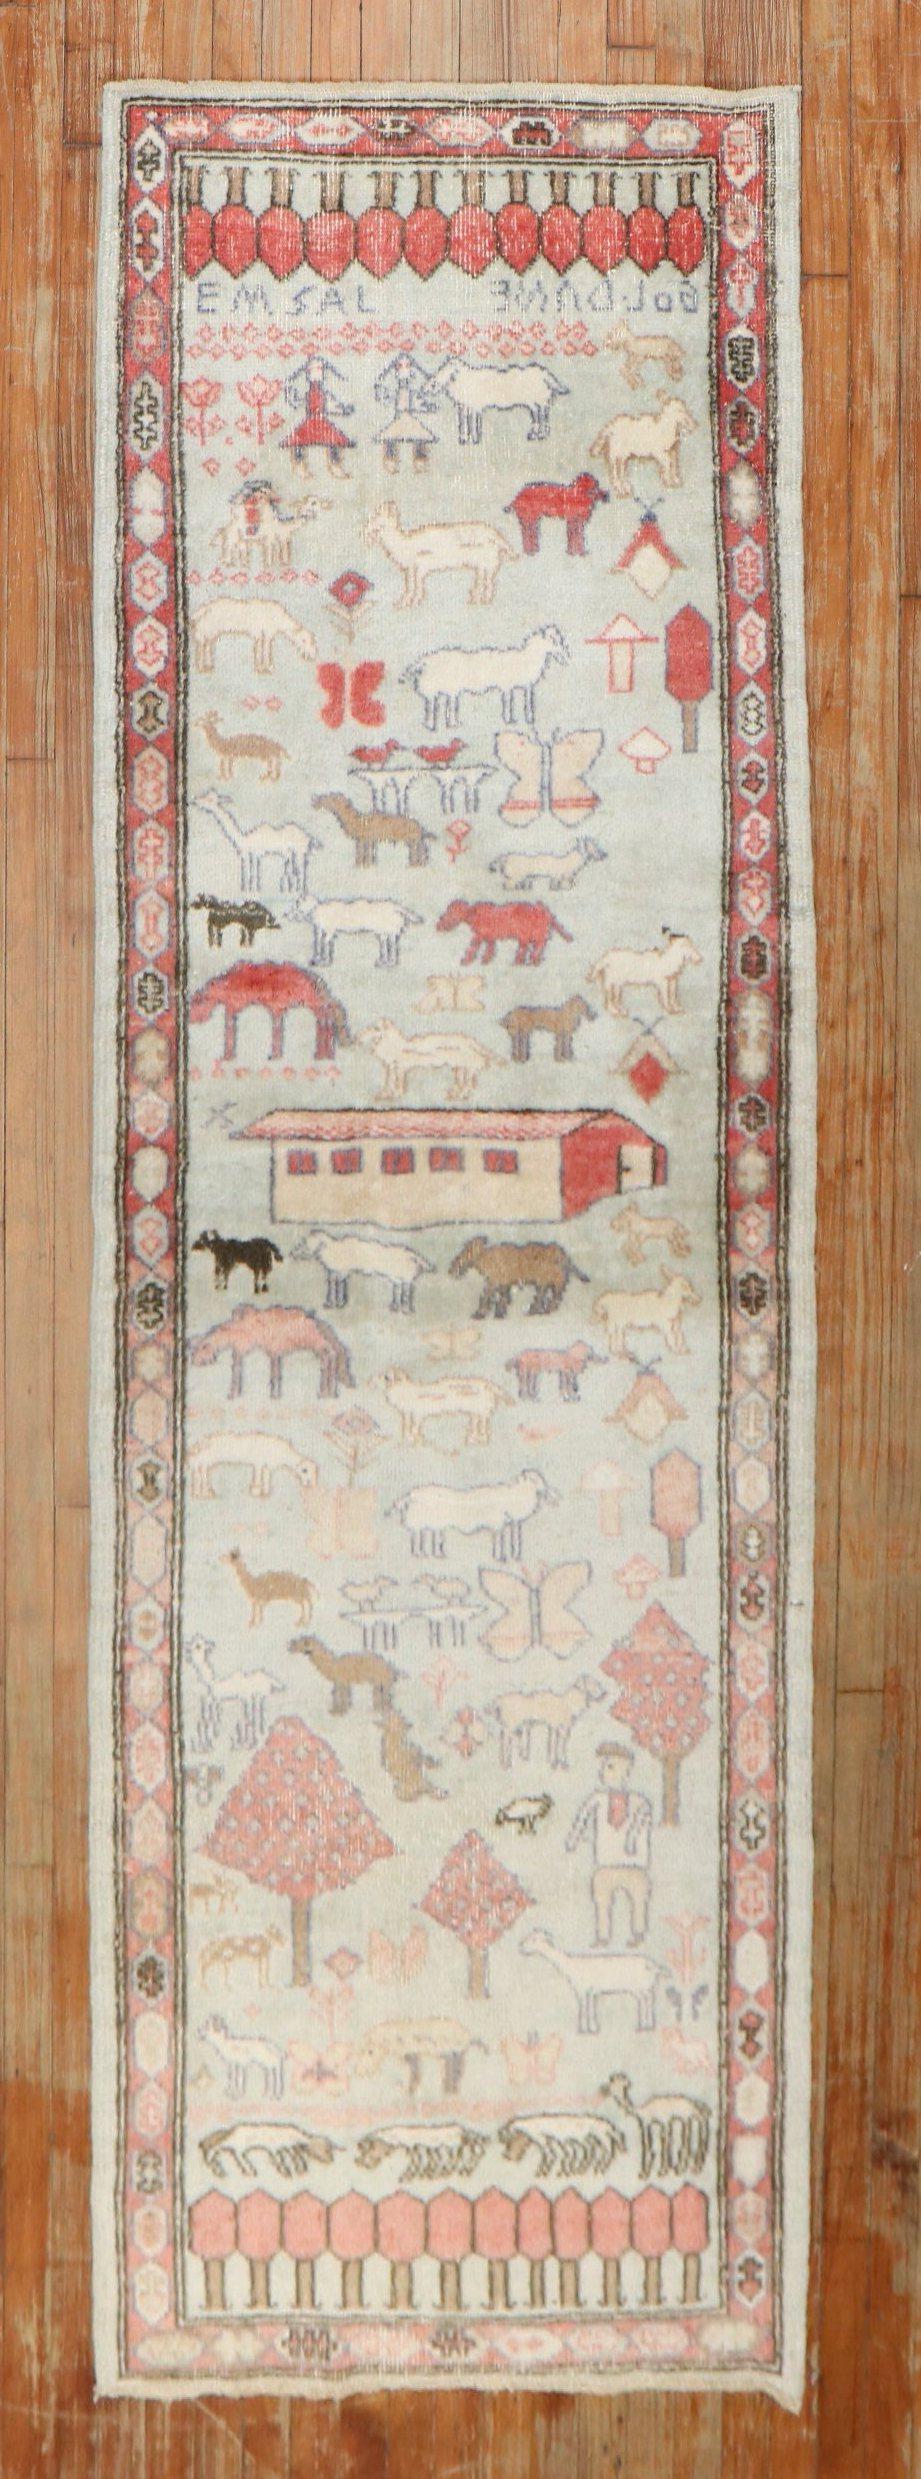 One-of-a-kind Turkish deco runner with a flurry of animals on a mint green field.

Measures: 2.10